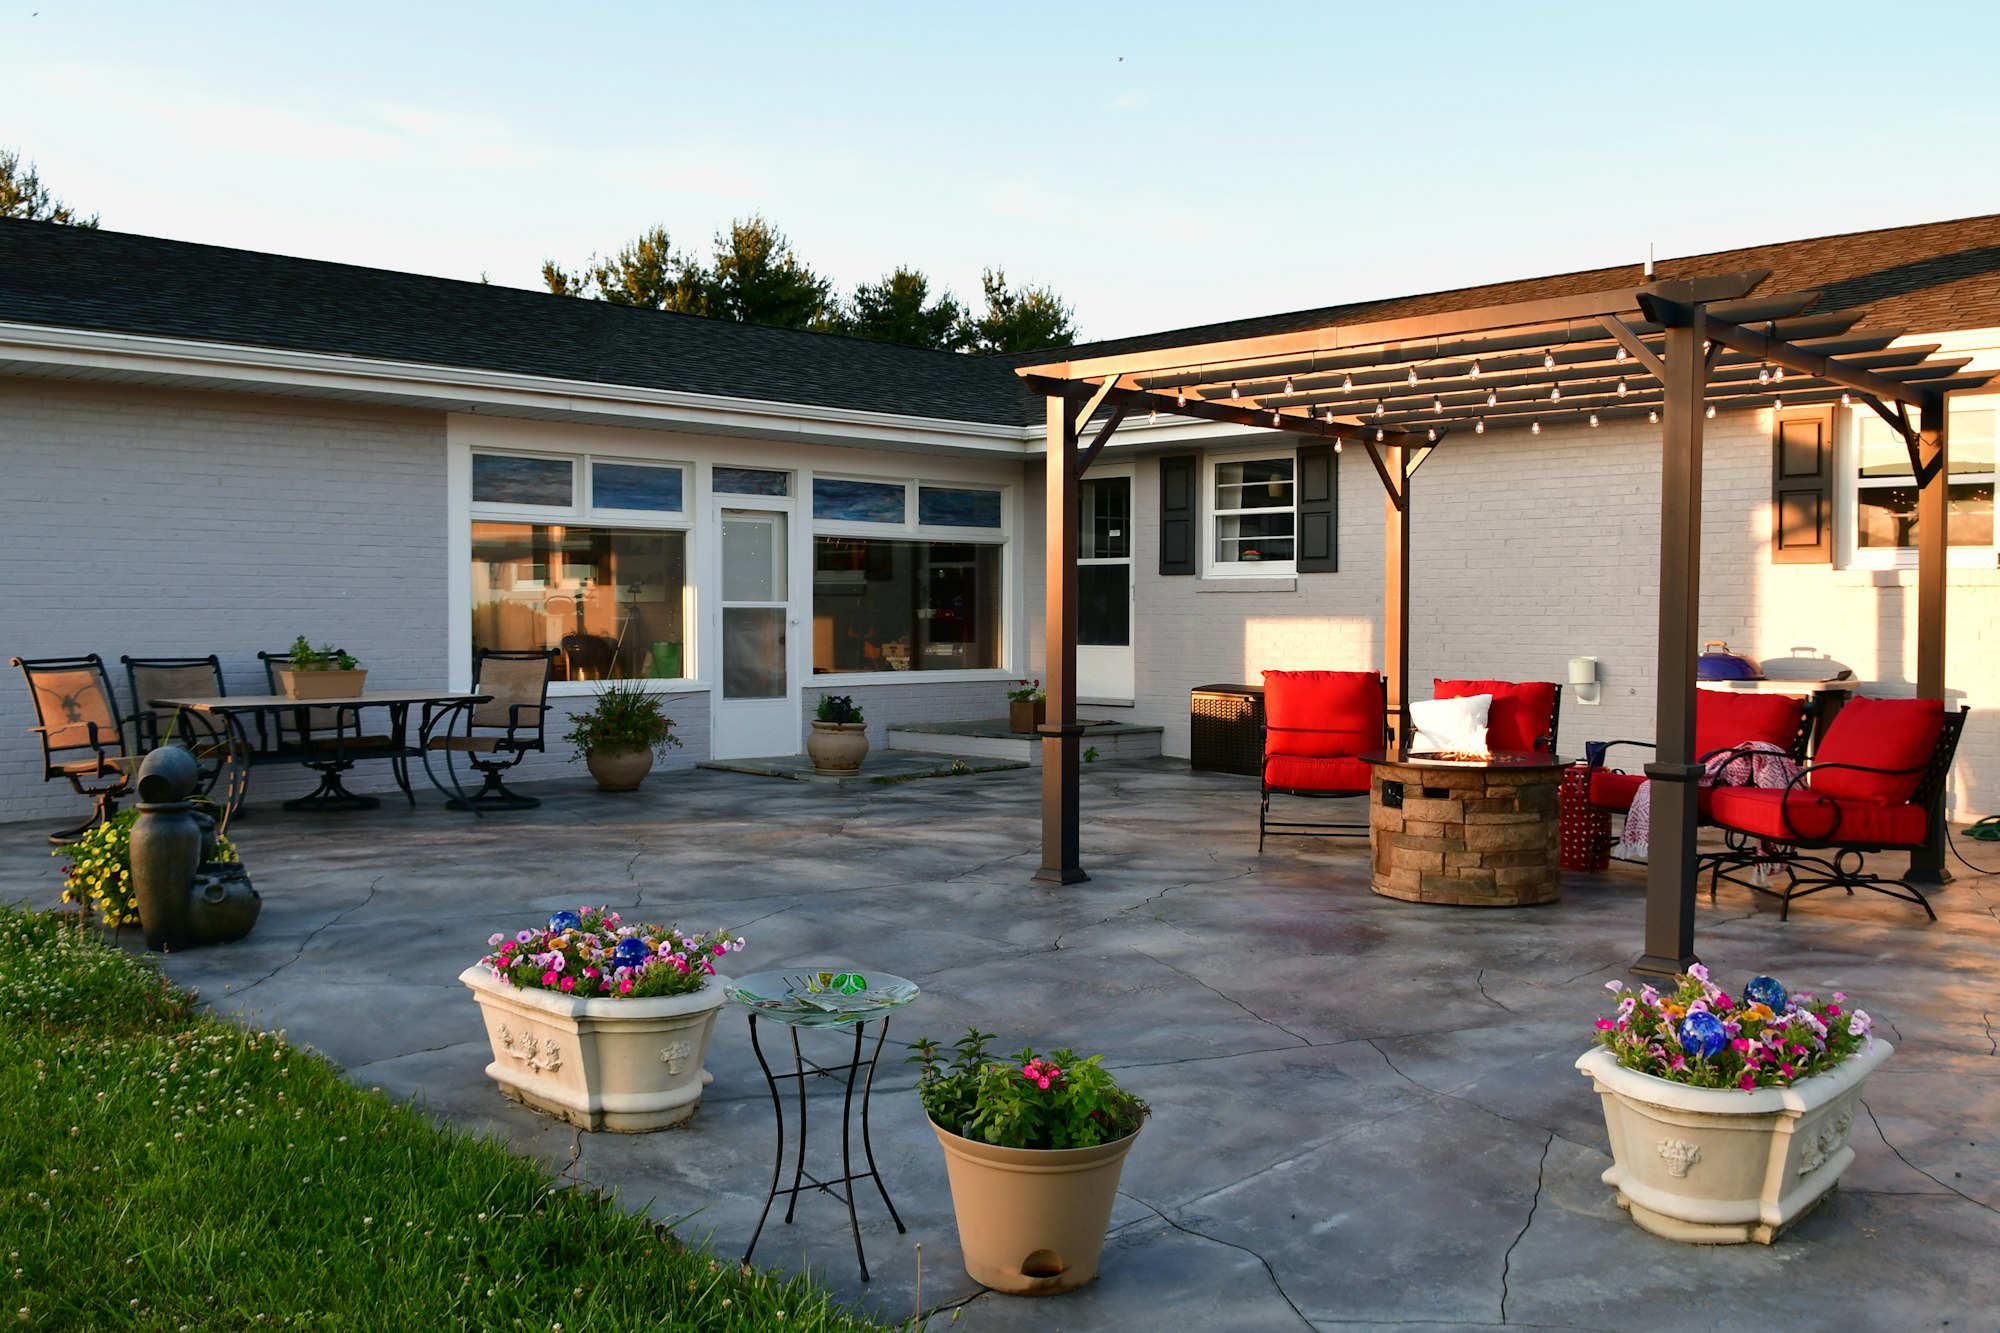 Patio living space with comfortable seating around fire pit under pergola with dining table